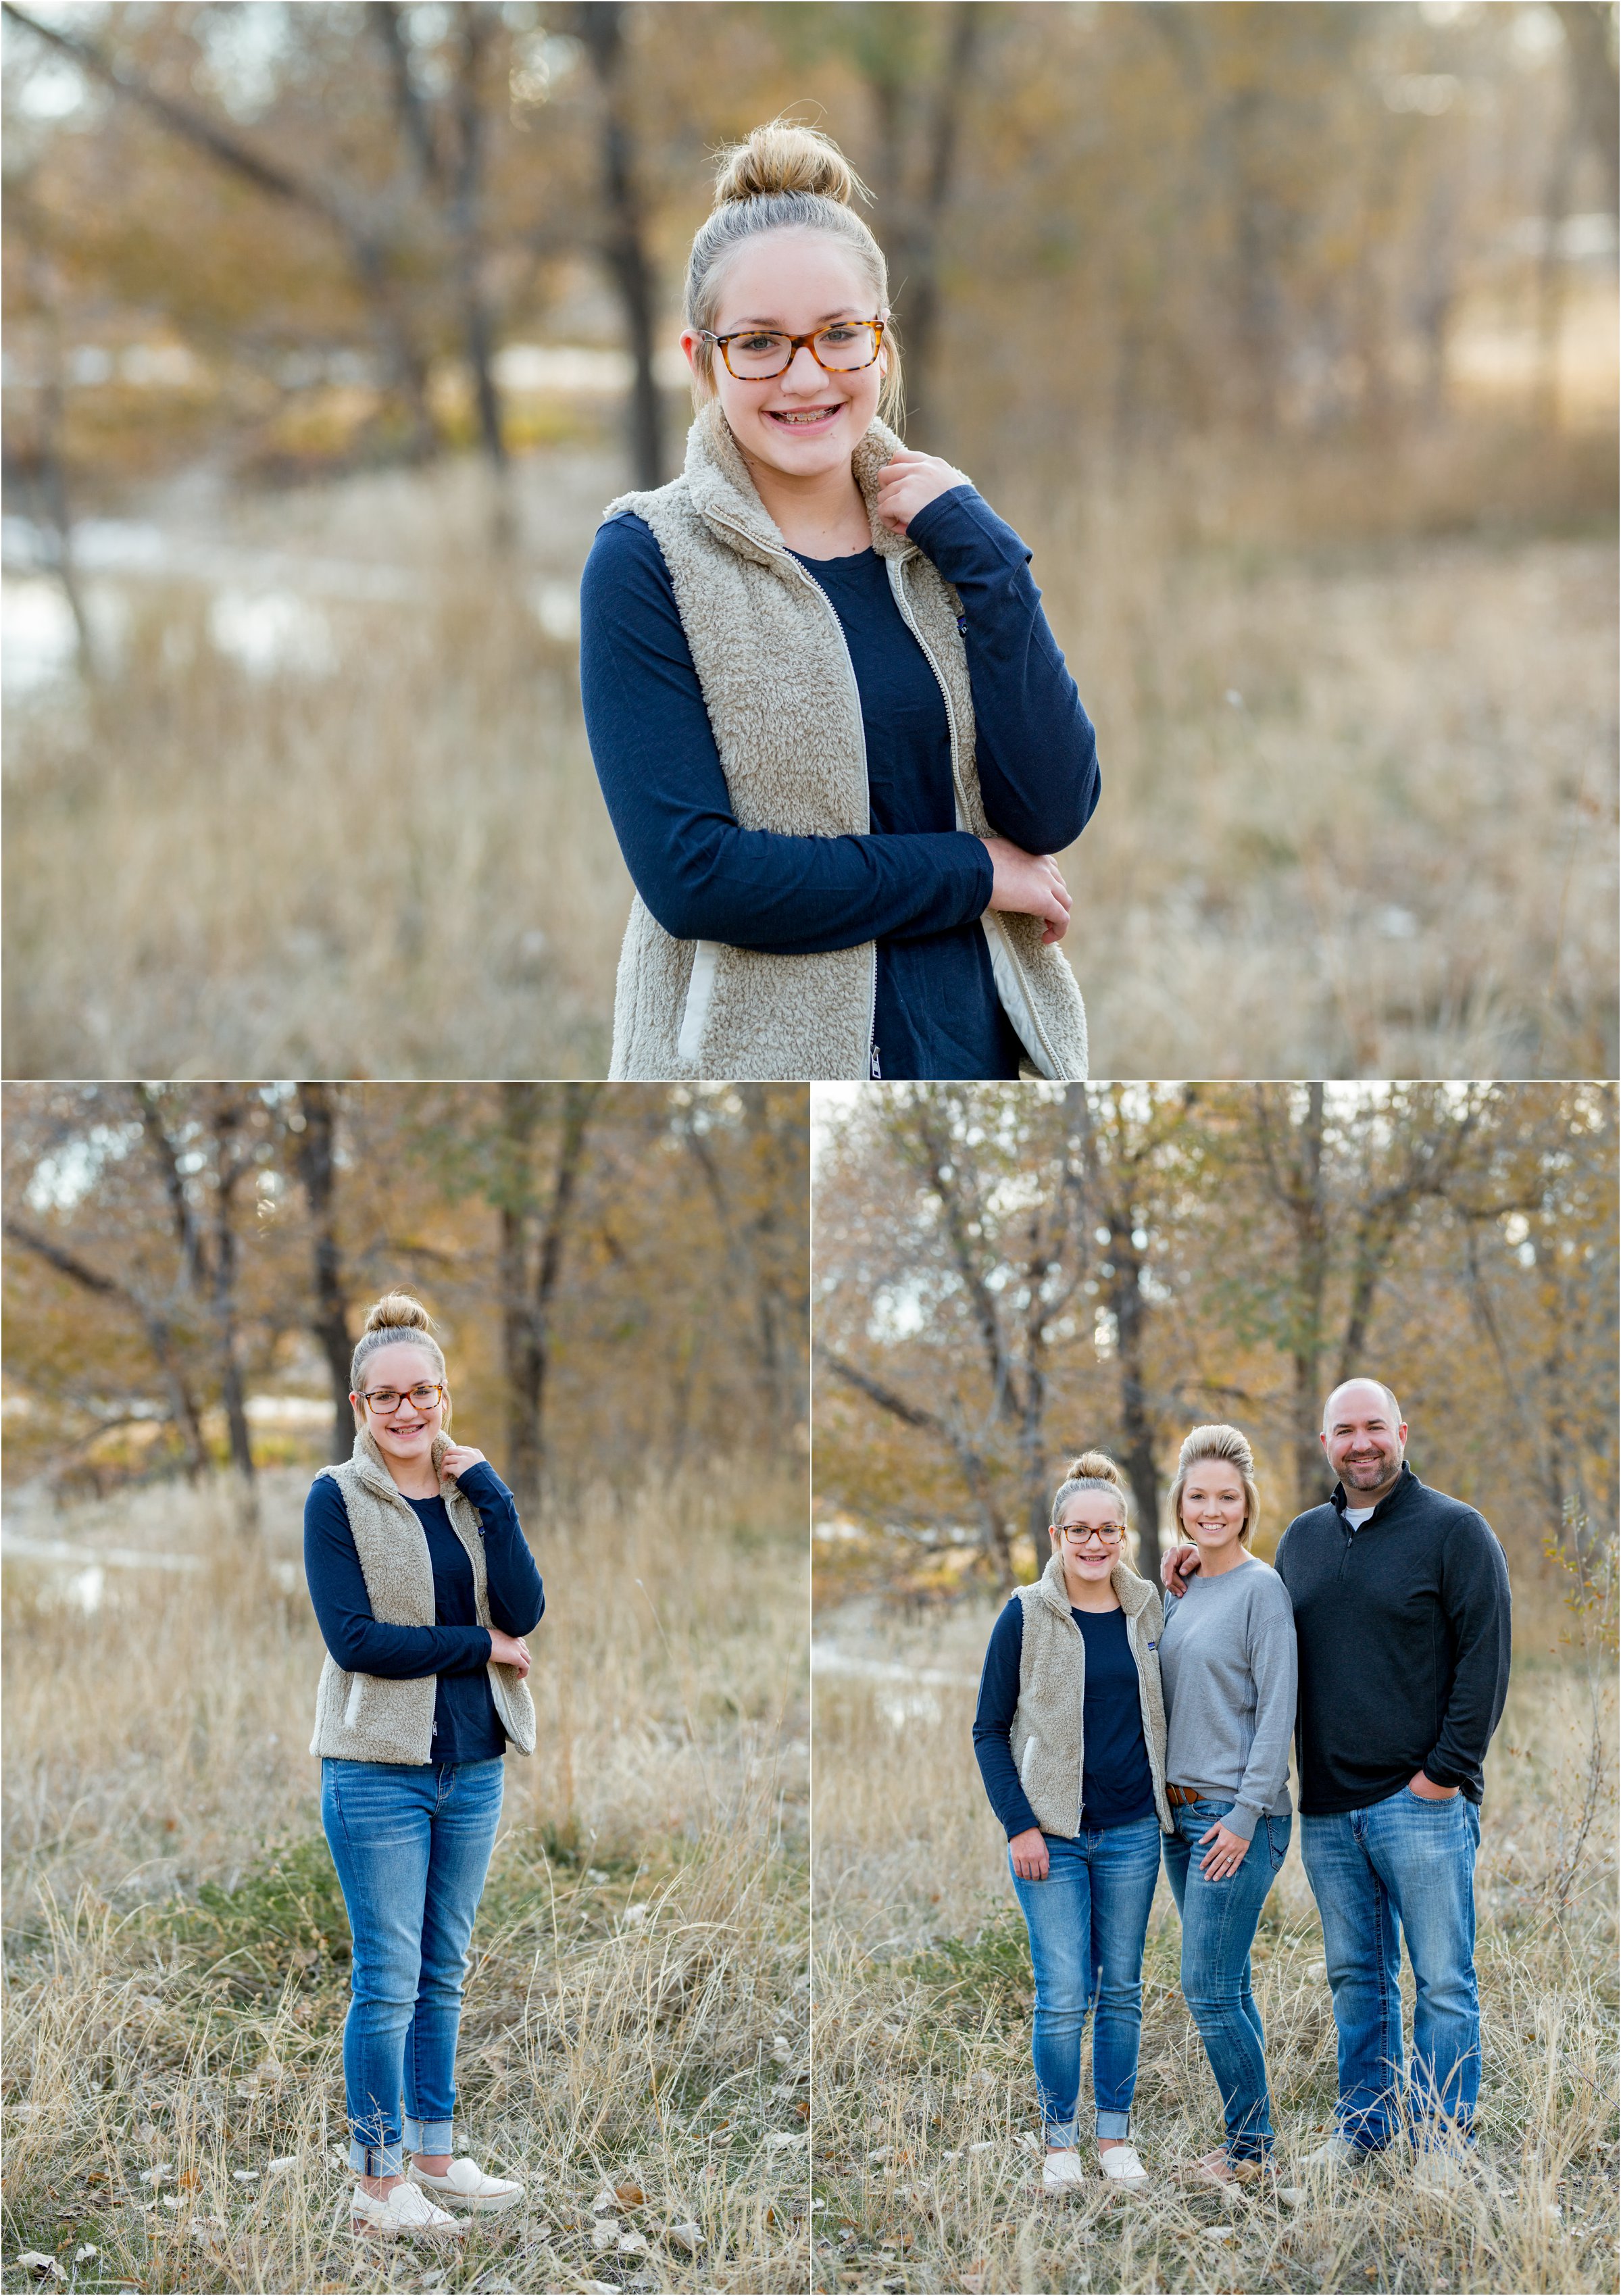 Greeley and Evans, Colorado Family Session by Greeley, Colorado Portrait and Wedding Photographer